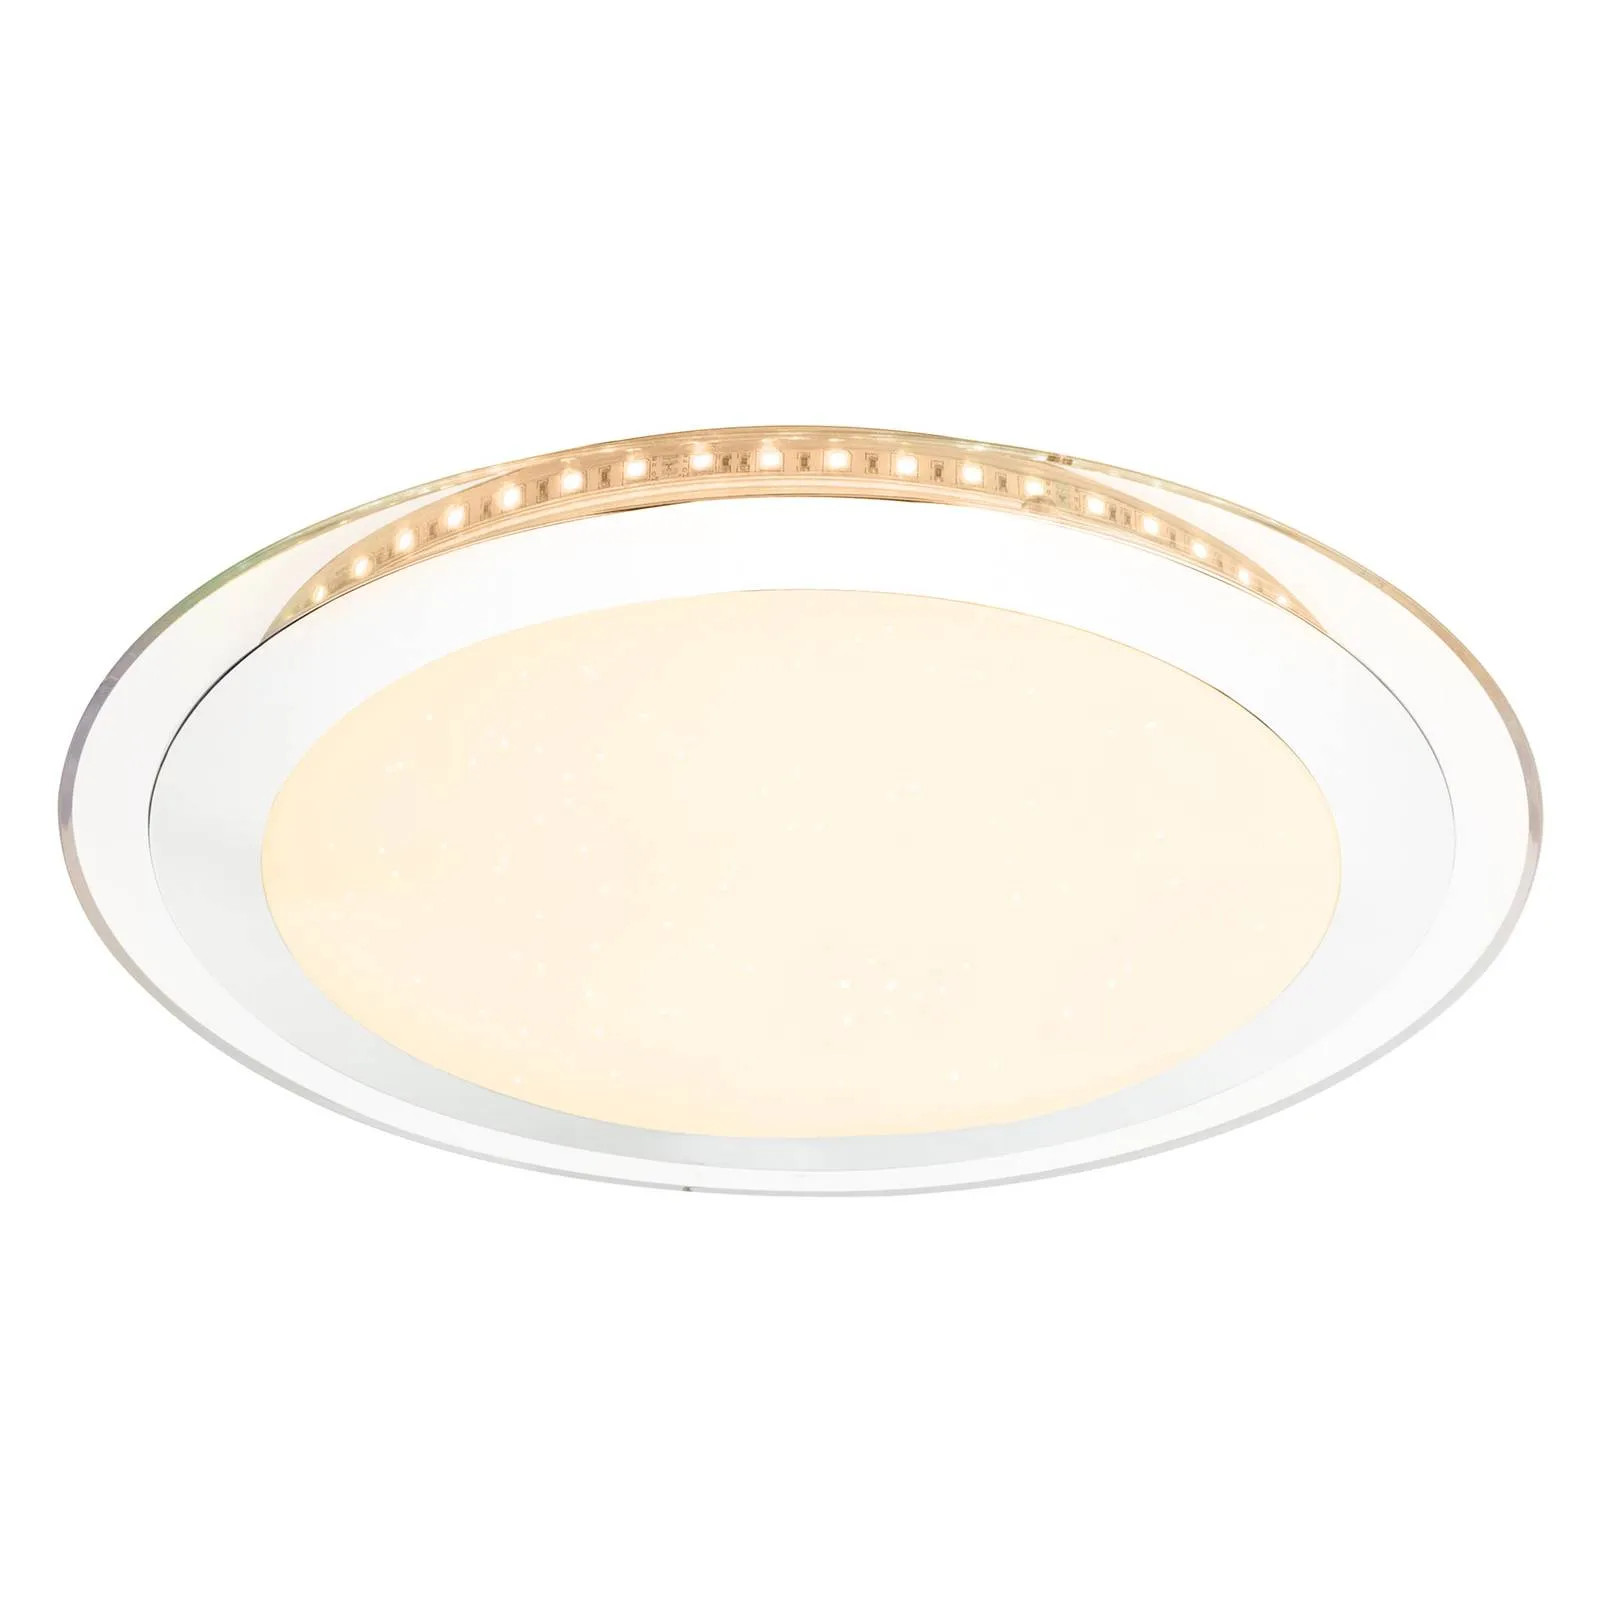 Nicole II LED ceiling light with remote control